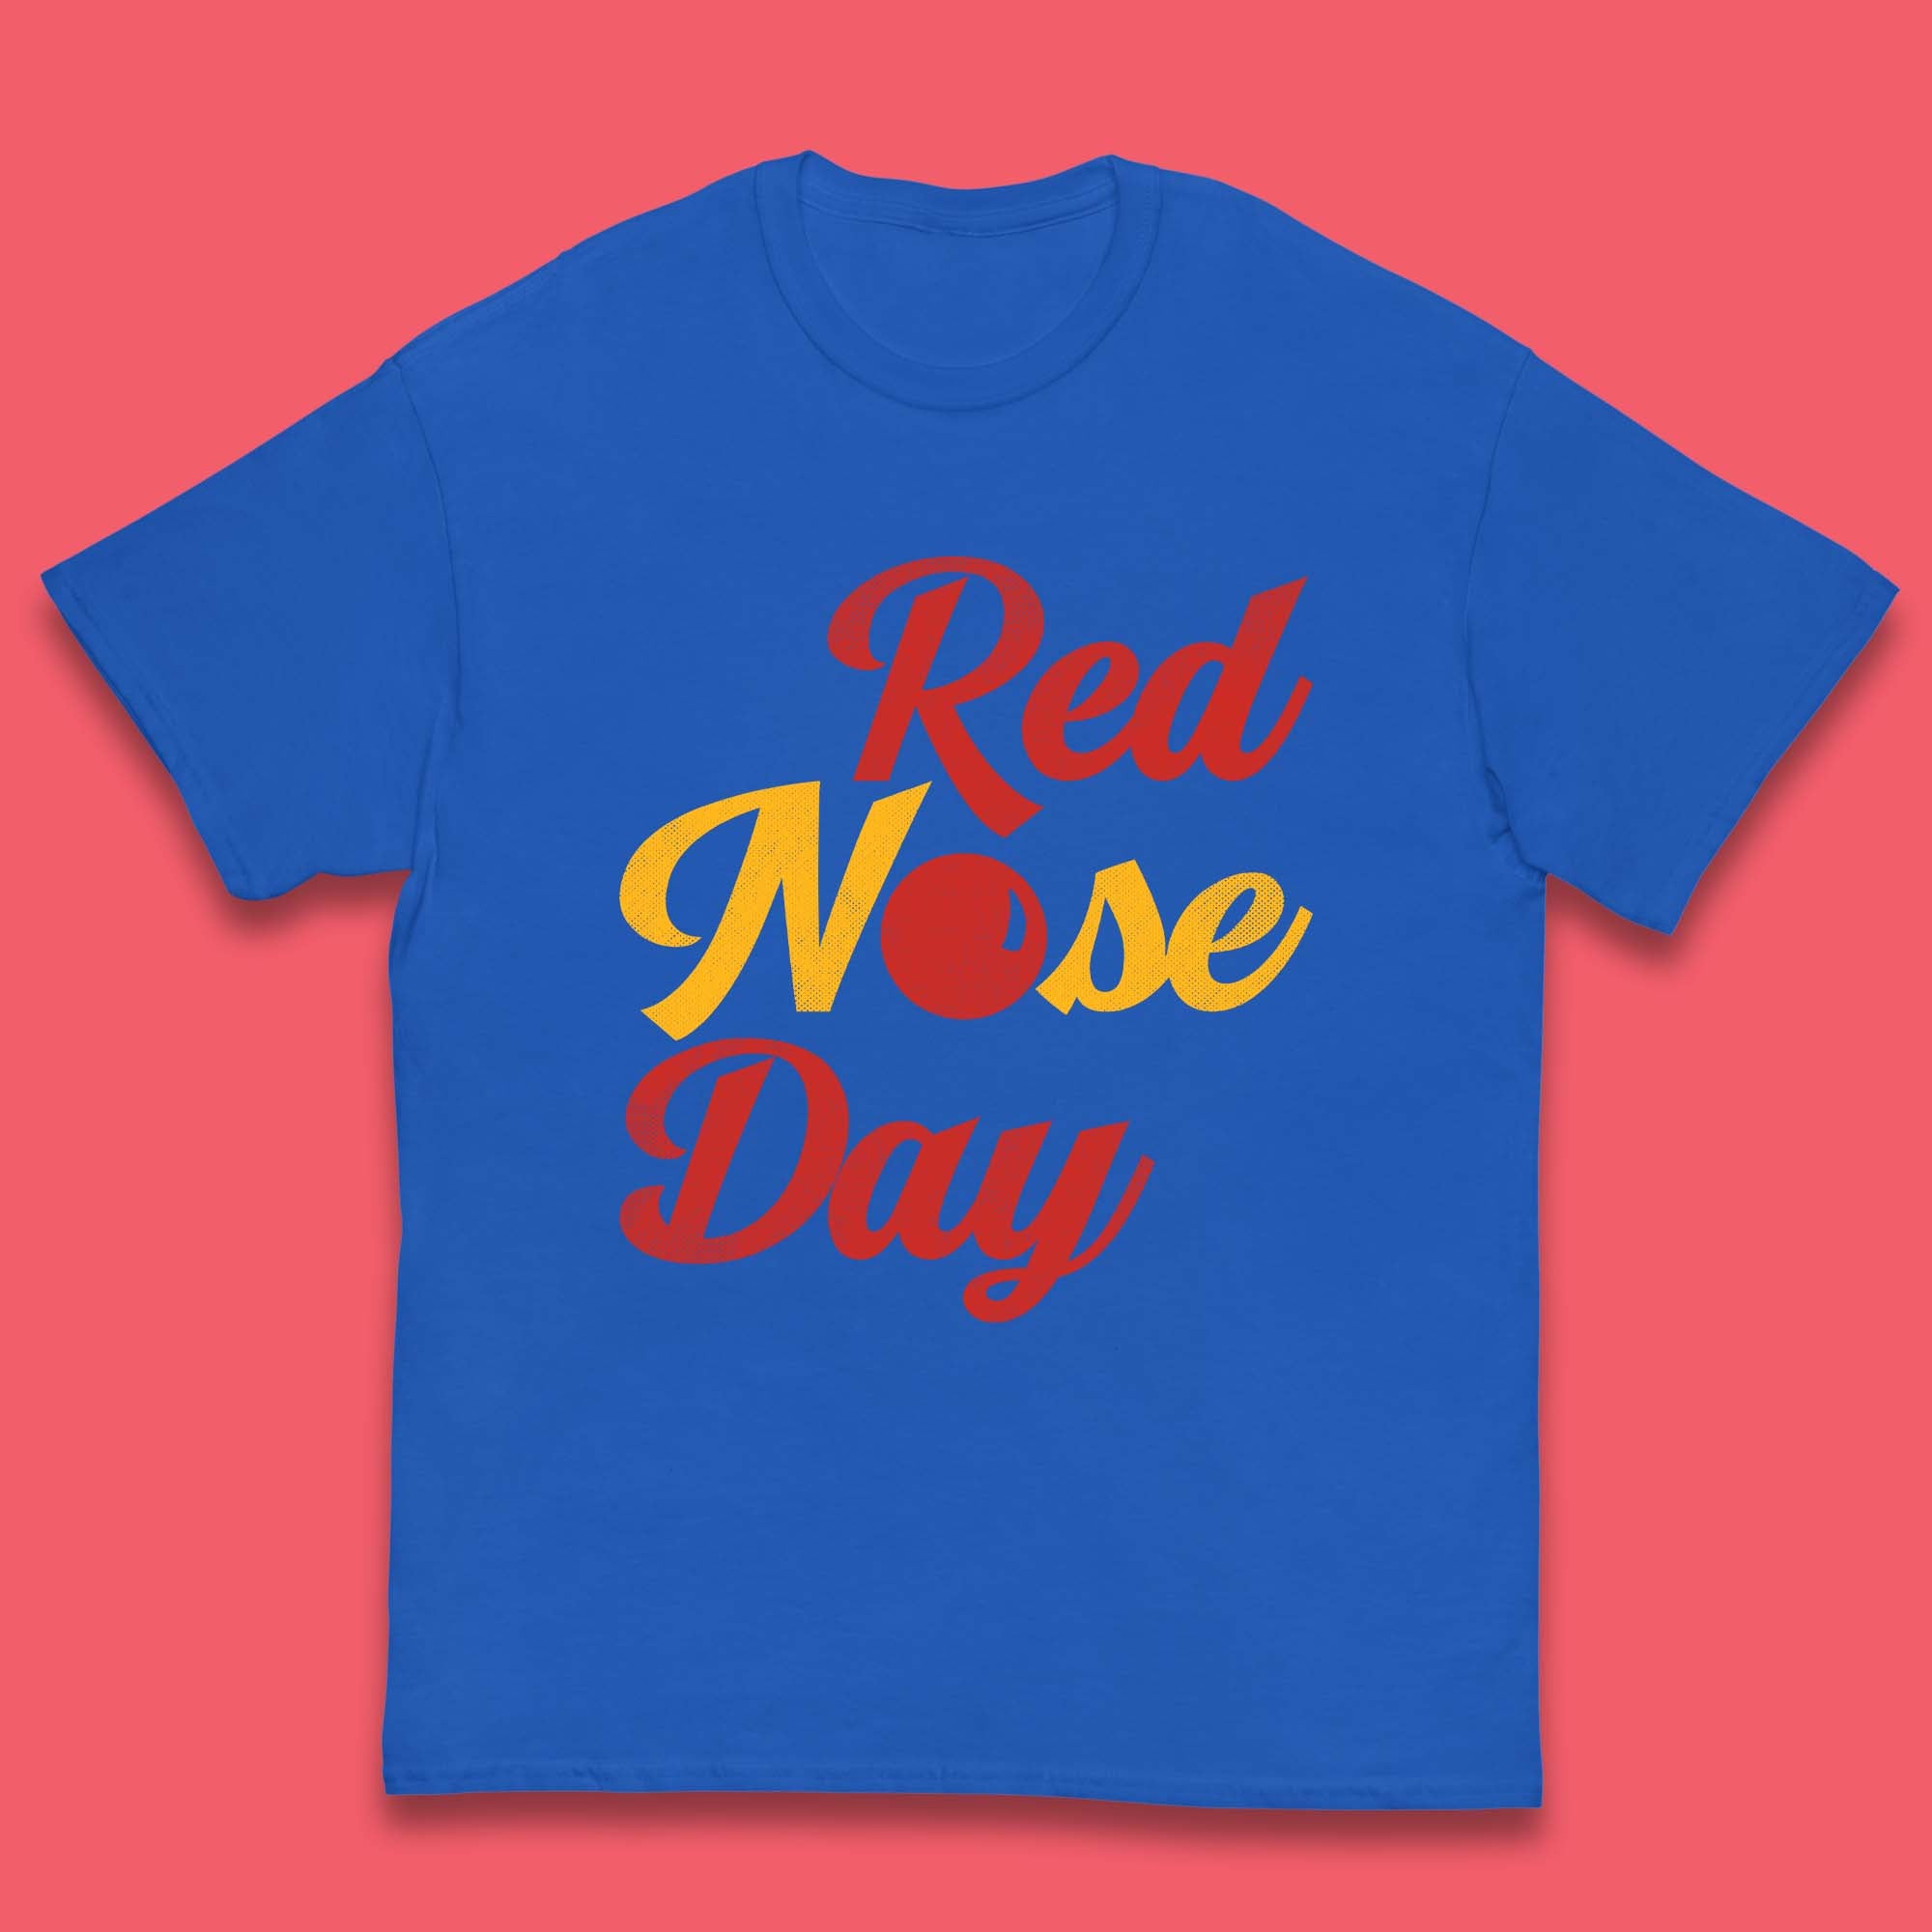 Red Nose Day Kids T-Shirt